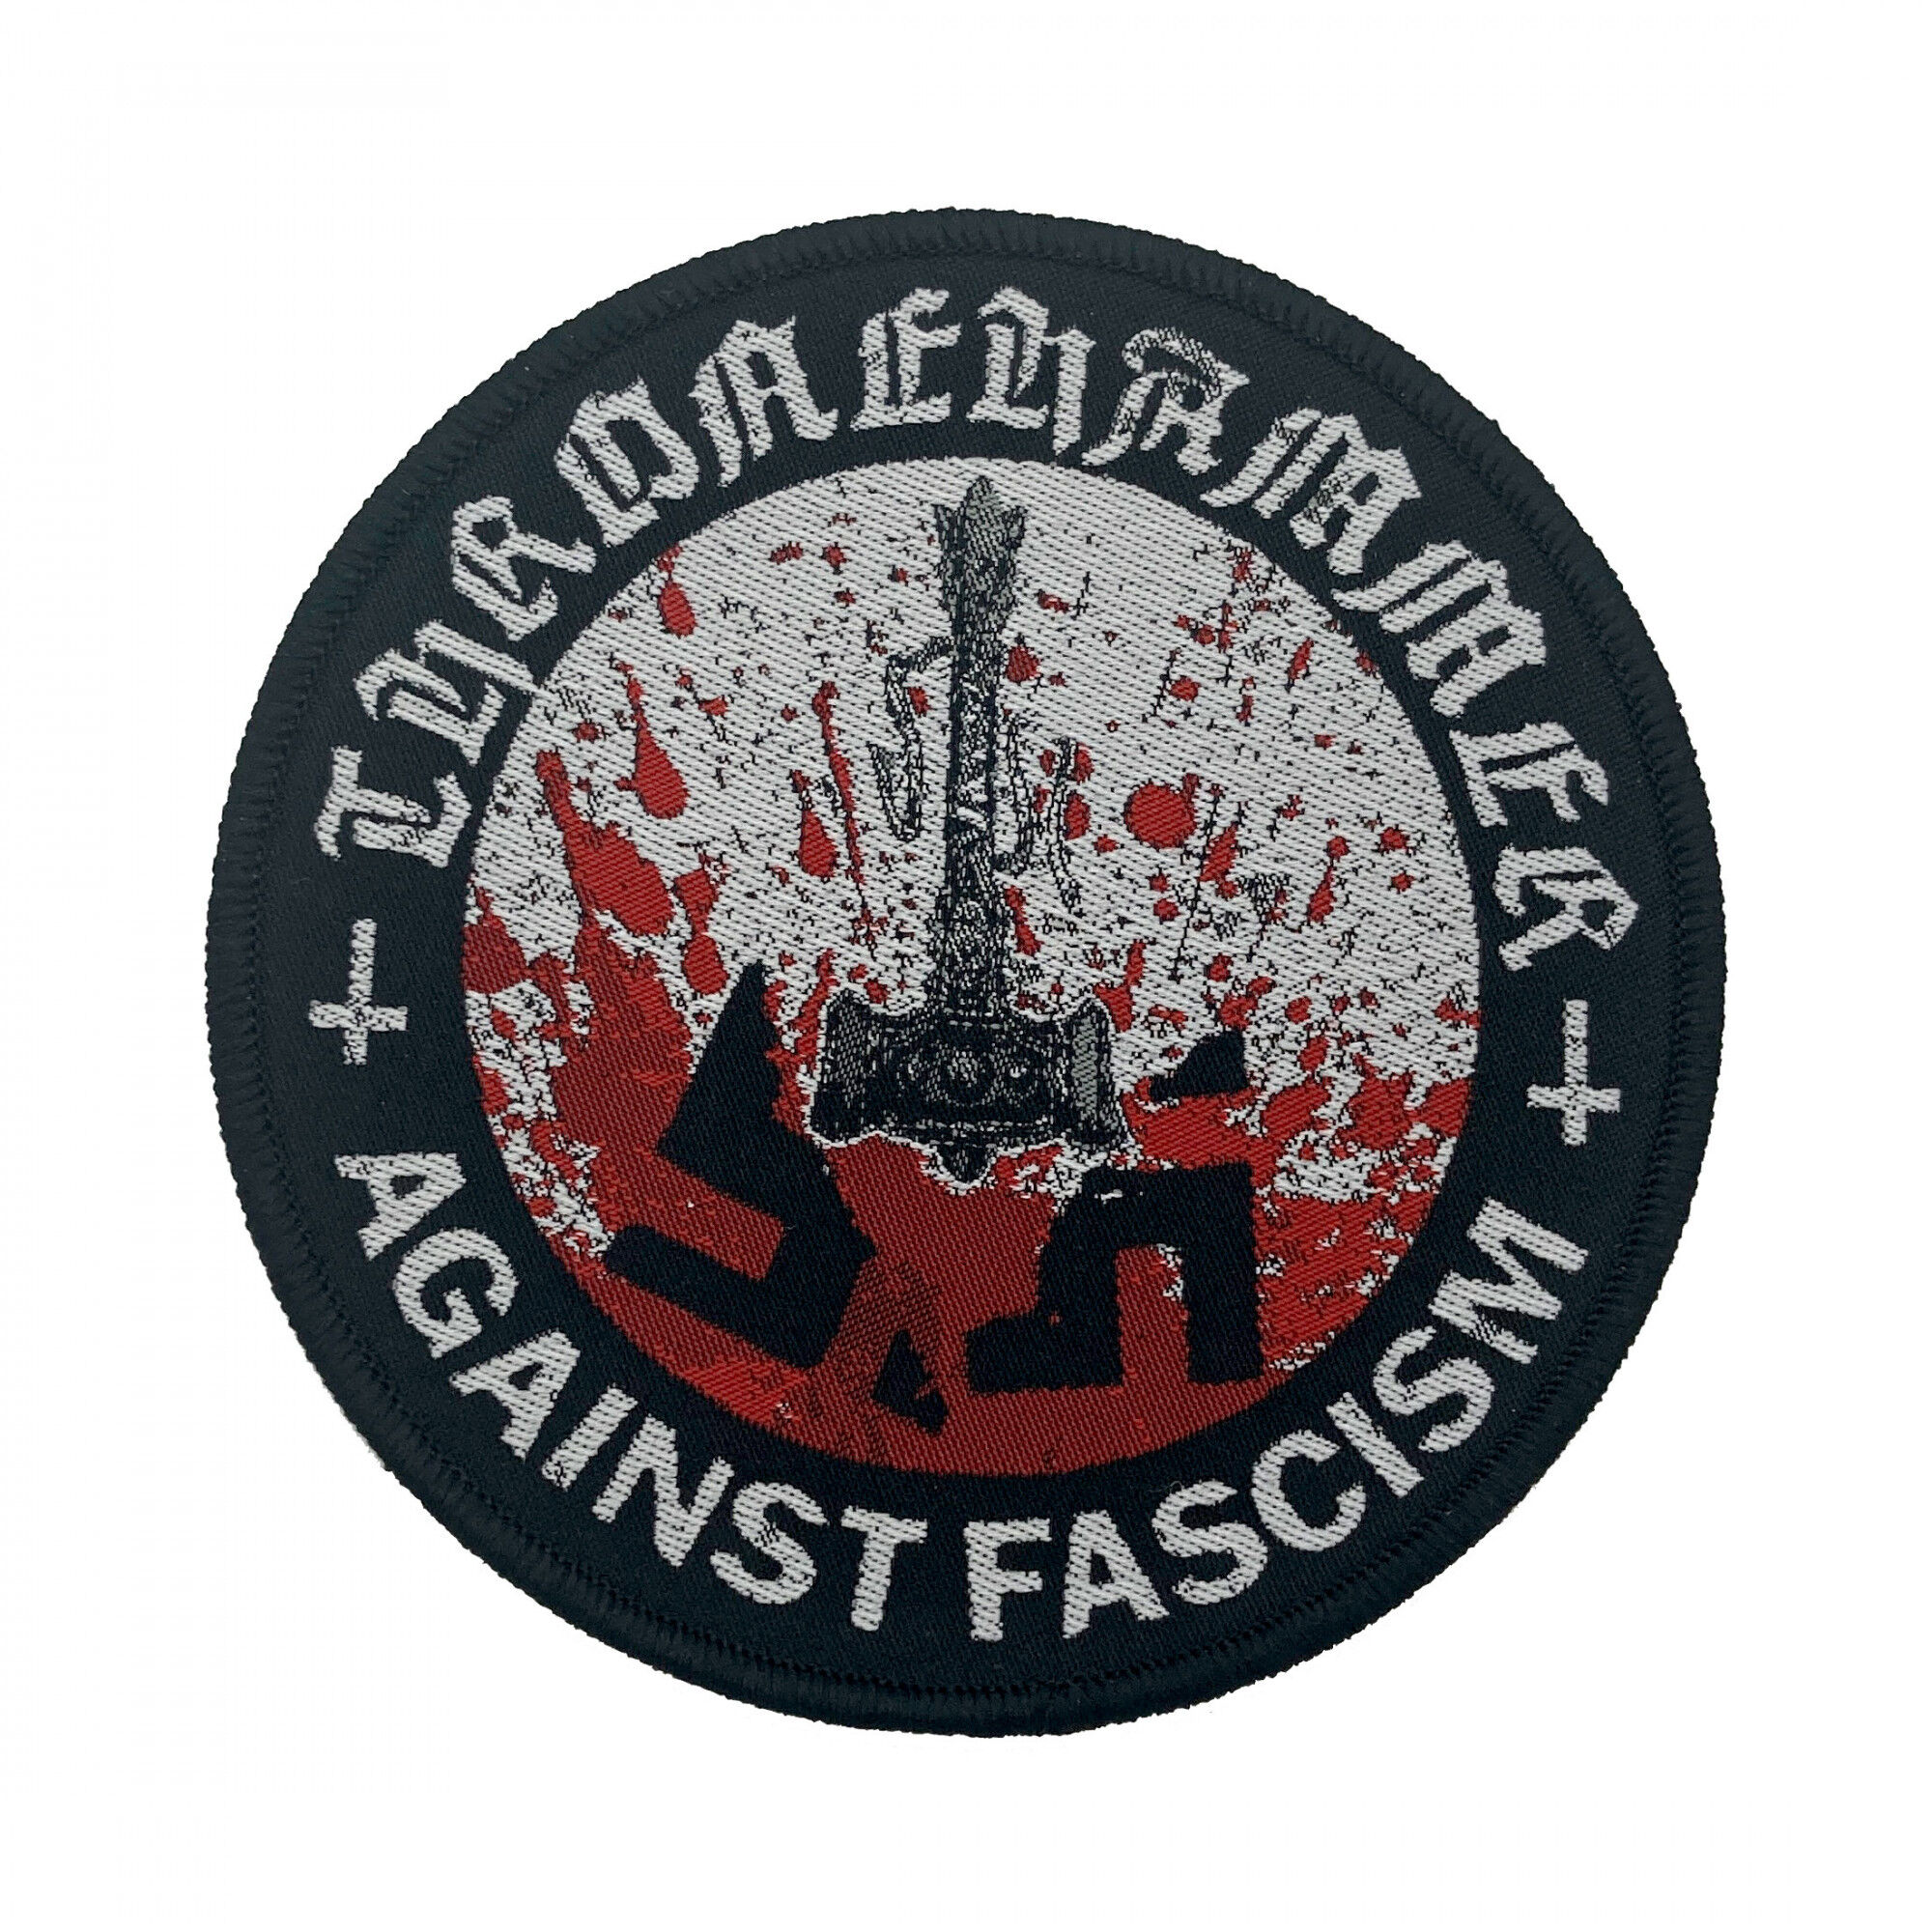 THRONEHAMMER - Against Fascism Patch [PATCH]